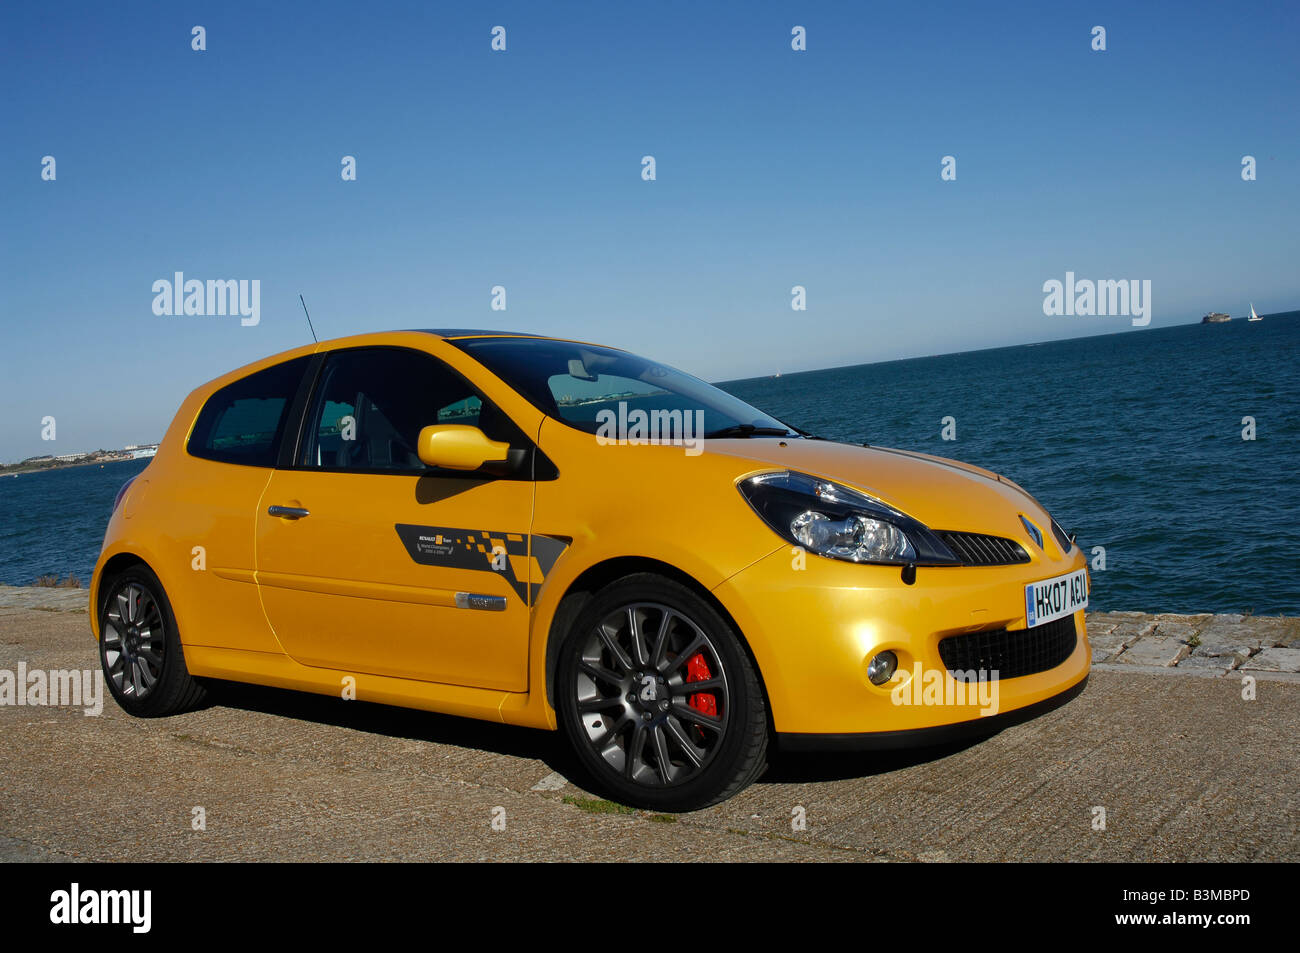 14 Clio Ii Royalty-Free Photos and Stock Images